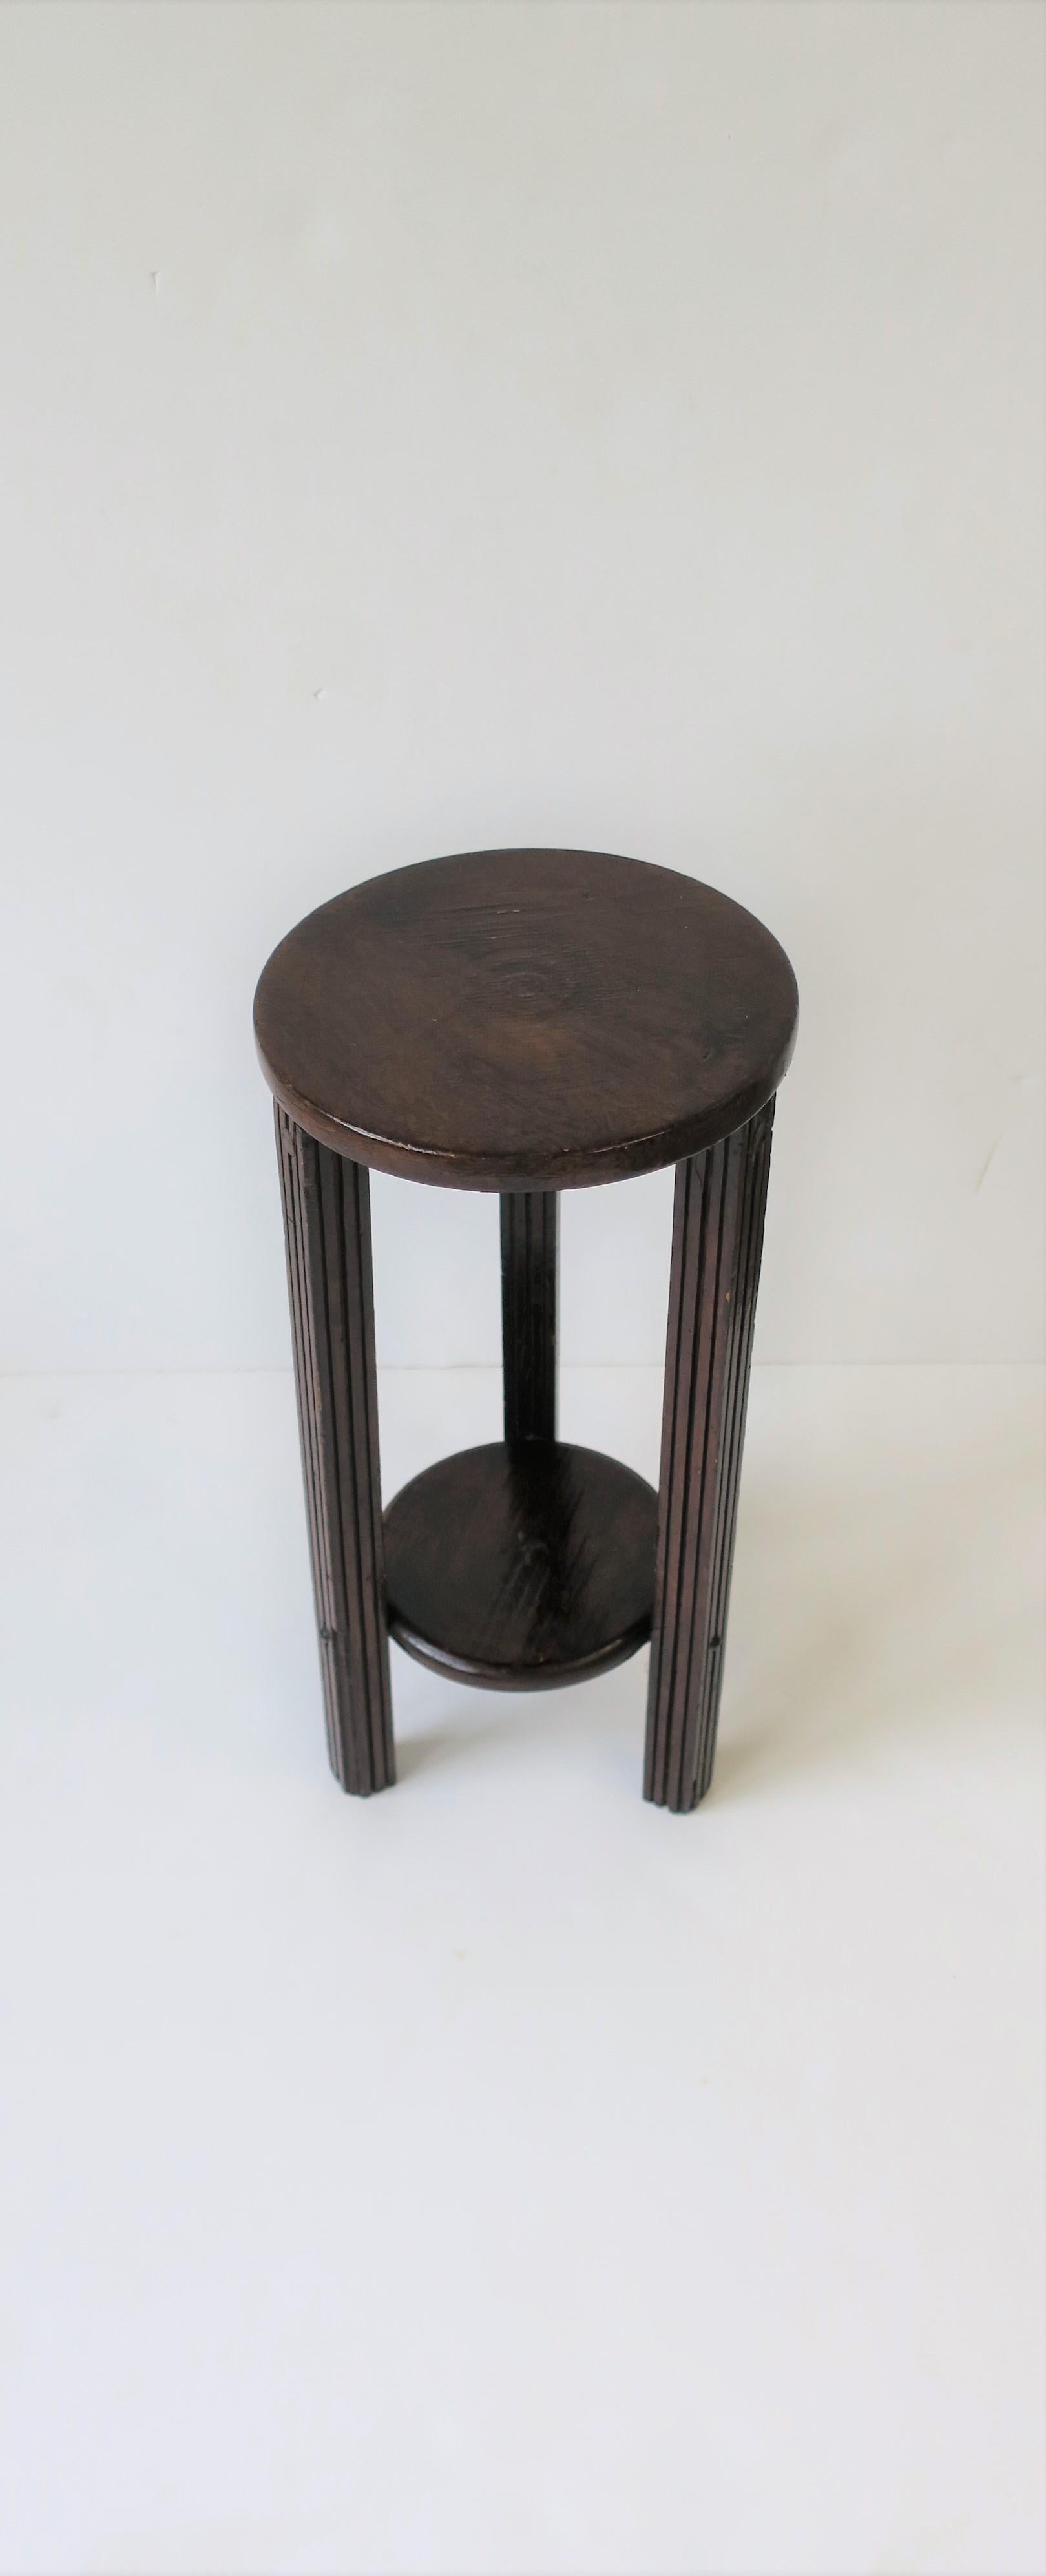 American Art Deco Period Round Side or Drinks Table 